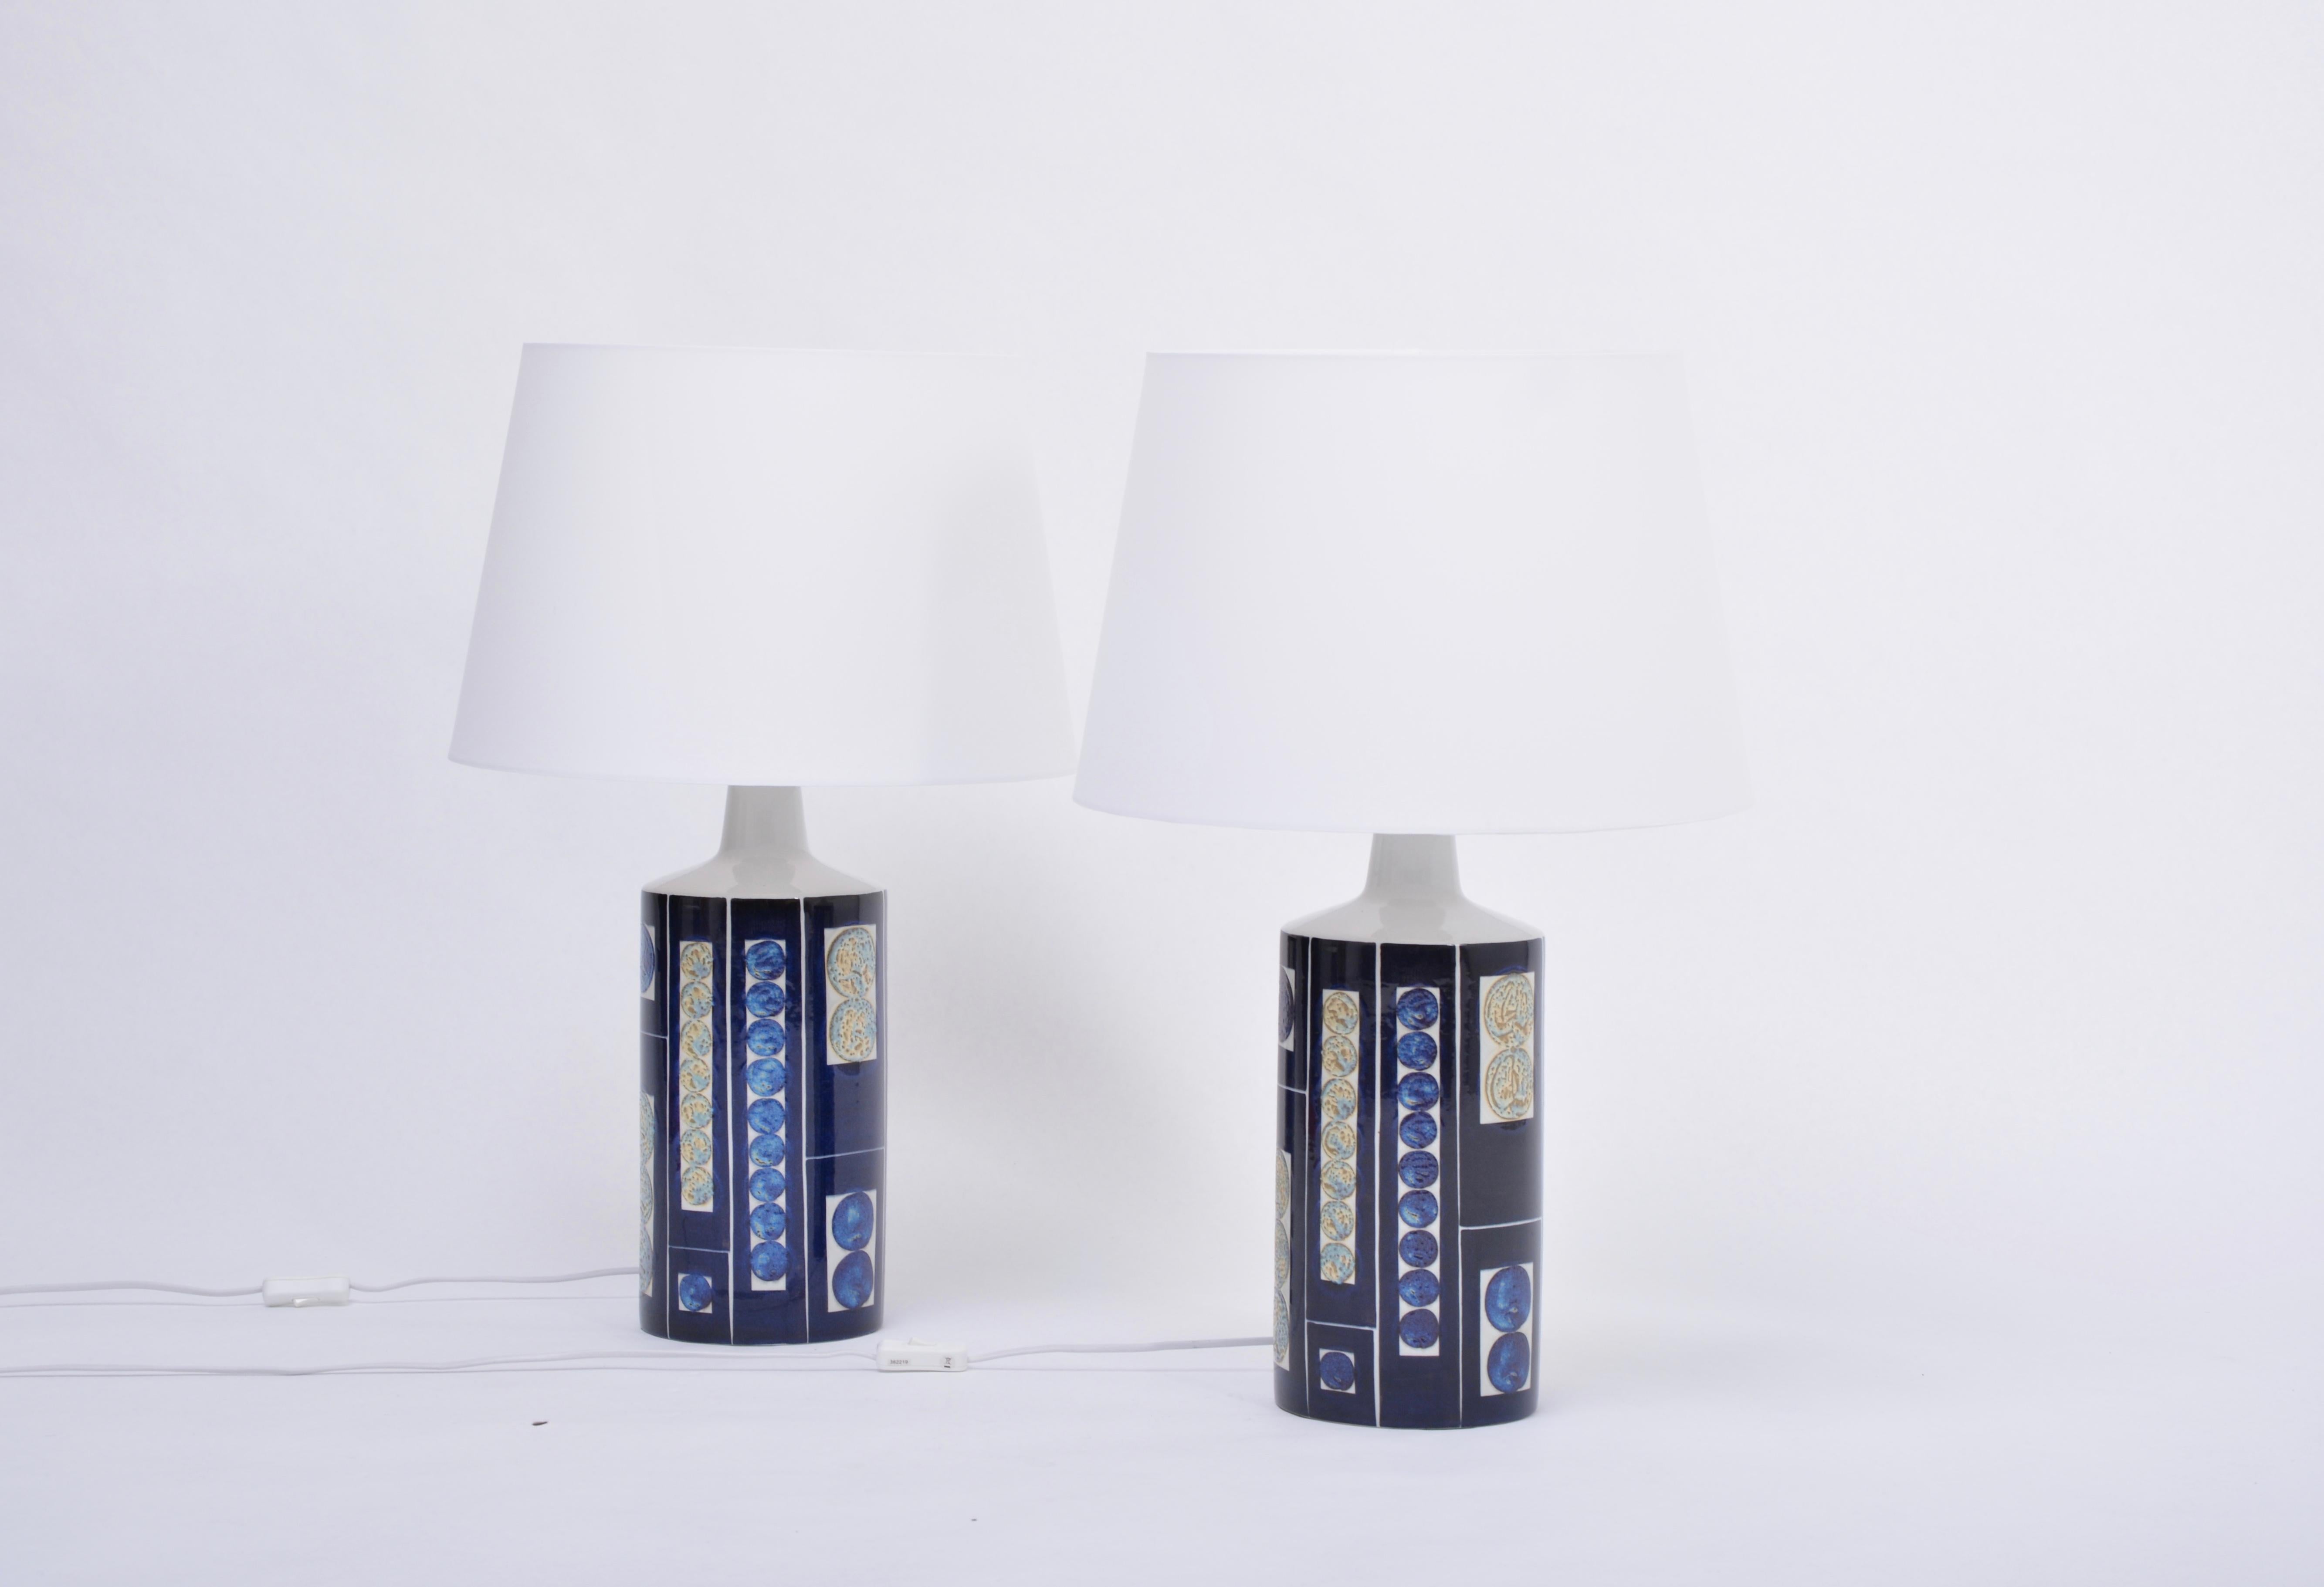 Pair of Blue Mid-Century Modern Royal 7 Tenera Table Lamps by Ingelise Koefoed for Fog & Mørup, 1967
Decorative table lamps with a gorgeous bold design in different tones of blue by Inge-Lise Koefoed for Aluminia/ Royal Copenhagen and produced by